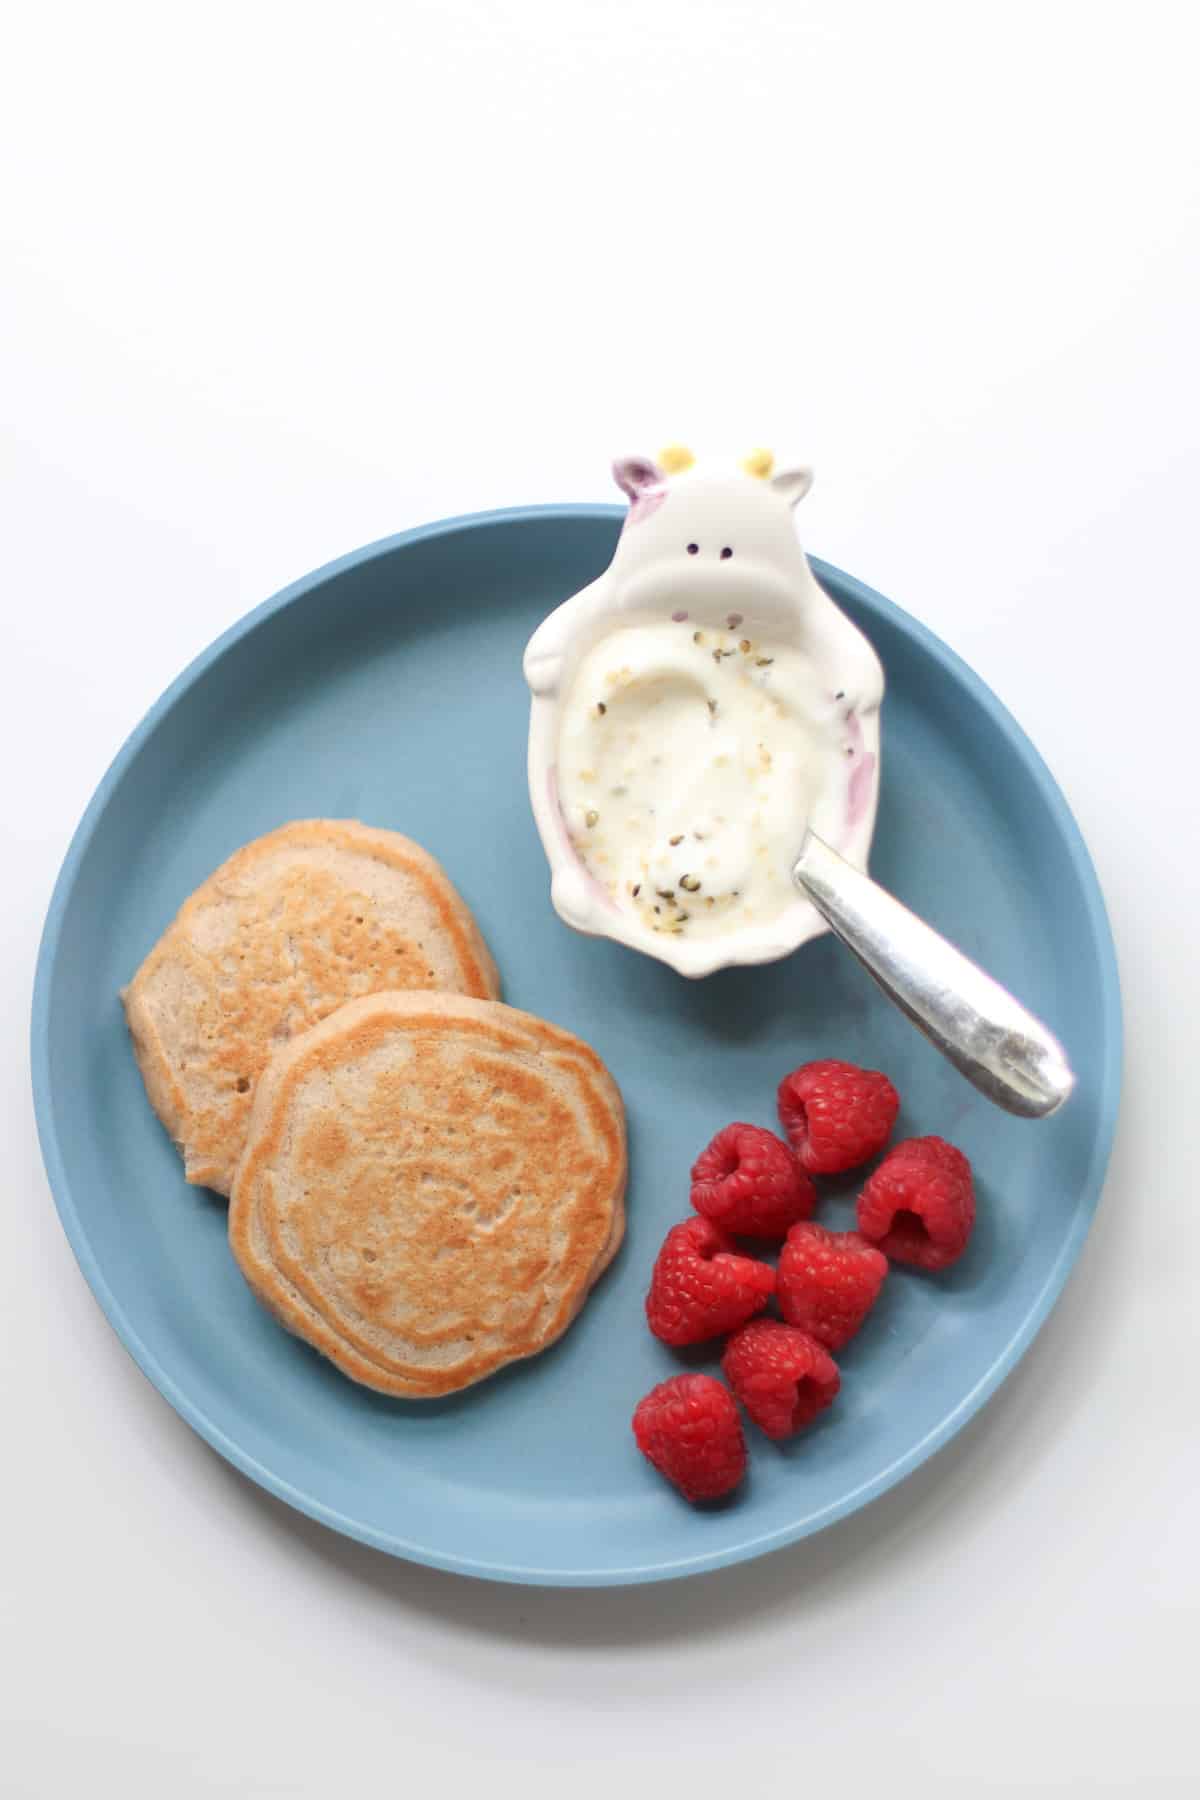 Two pancakes with raspberries and yogurt on a blue plate.